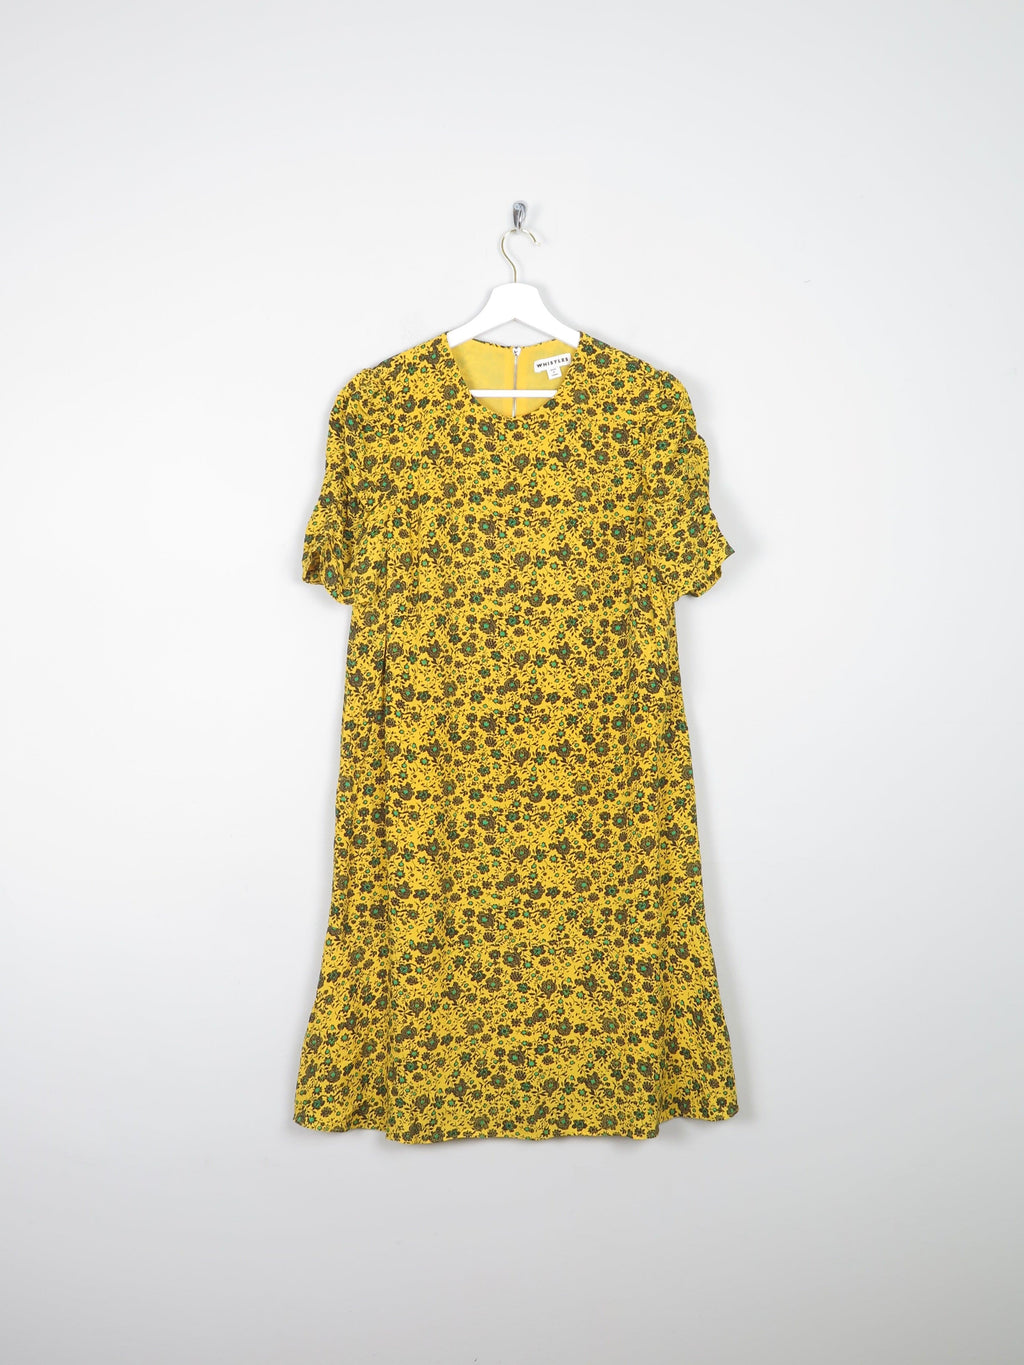 Whistles Mustard Floral Dress 12 - The Harlequin